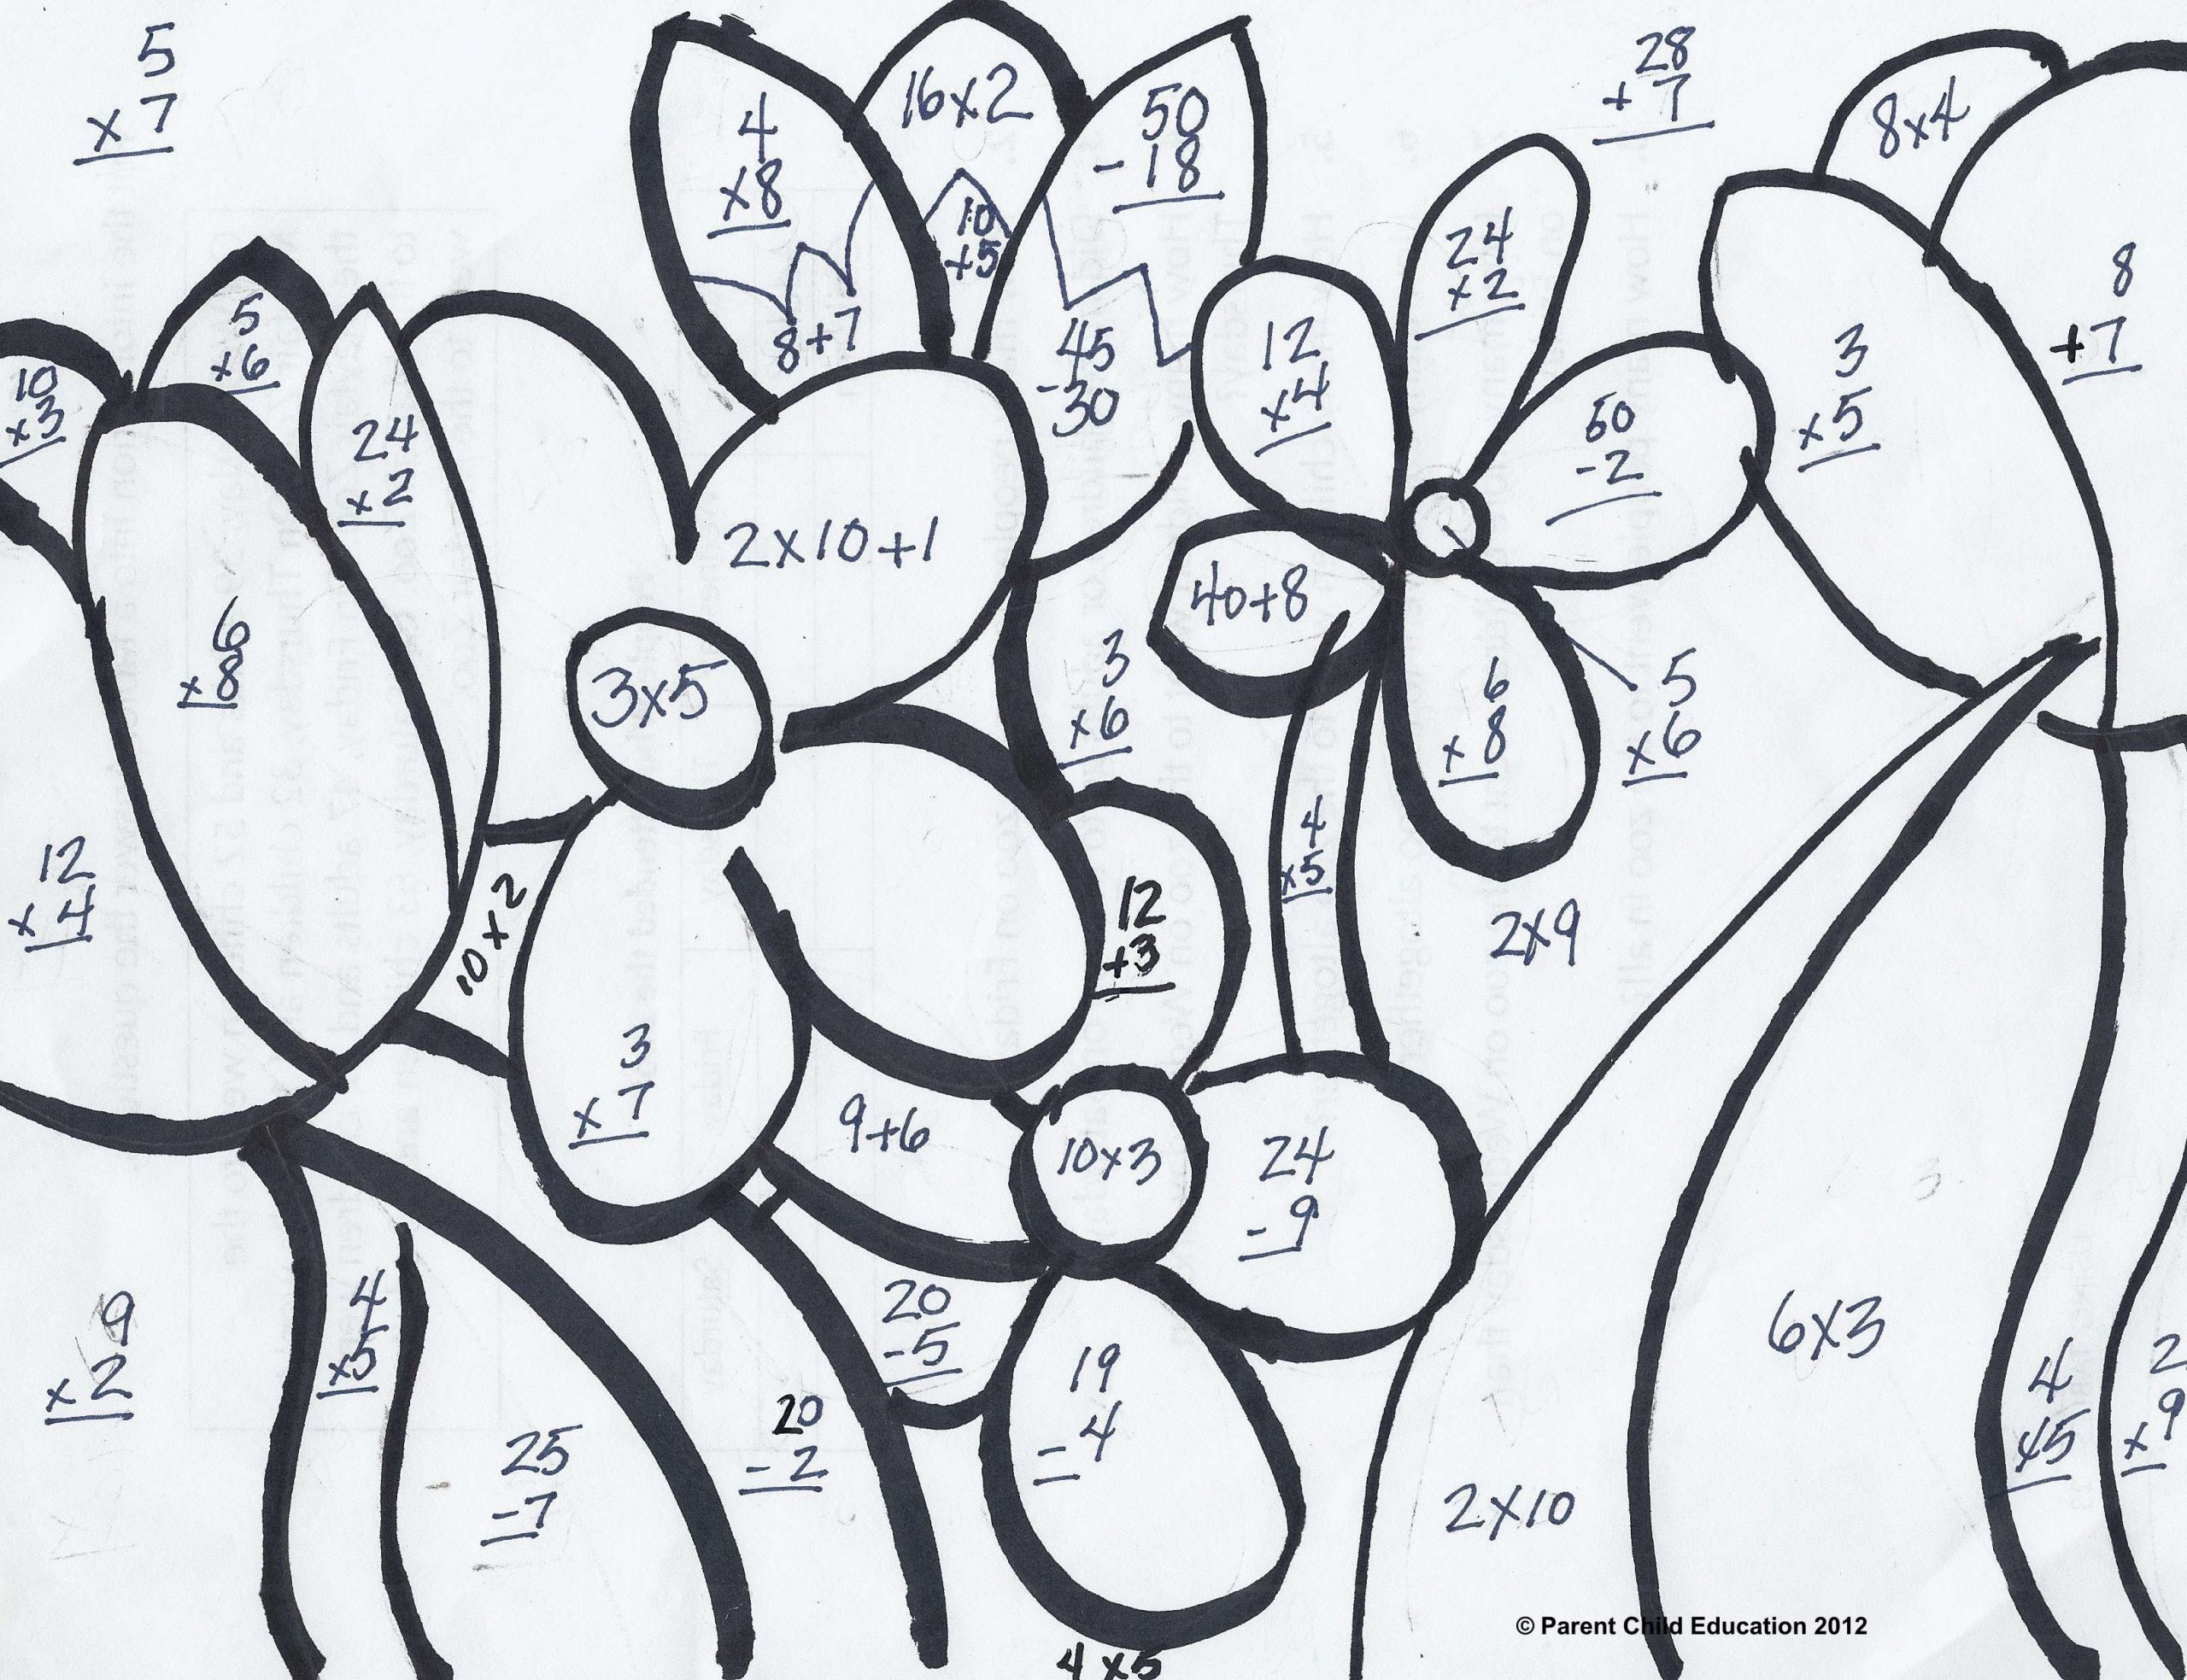 Free Math Worksheets Second Grade 2 Subtraction Subtract whole Hundreds From 3 Digit Numbers